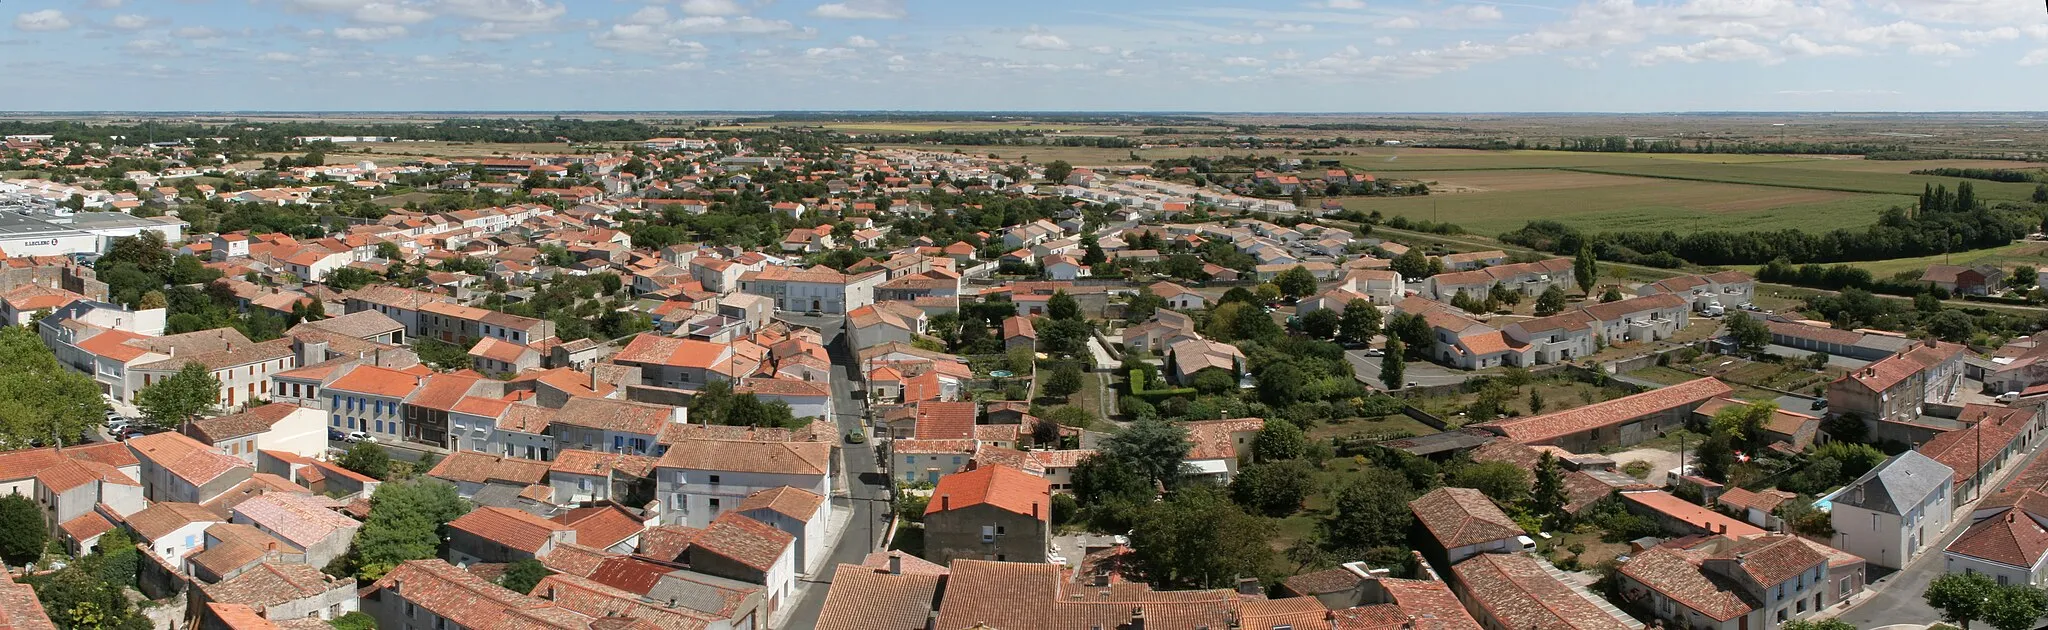 Photo showing: Panoramic view of the town of Marennes, France, taken from the tower of the Saint-Pierre-de-Sales Church, pointing East.